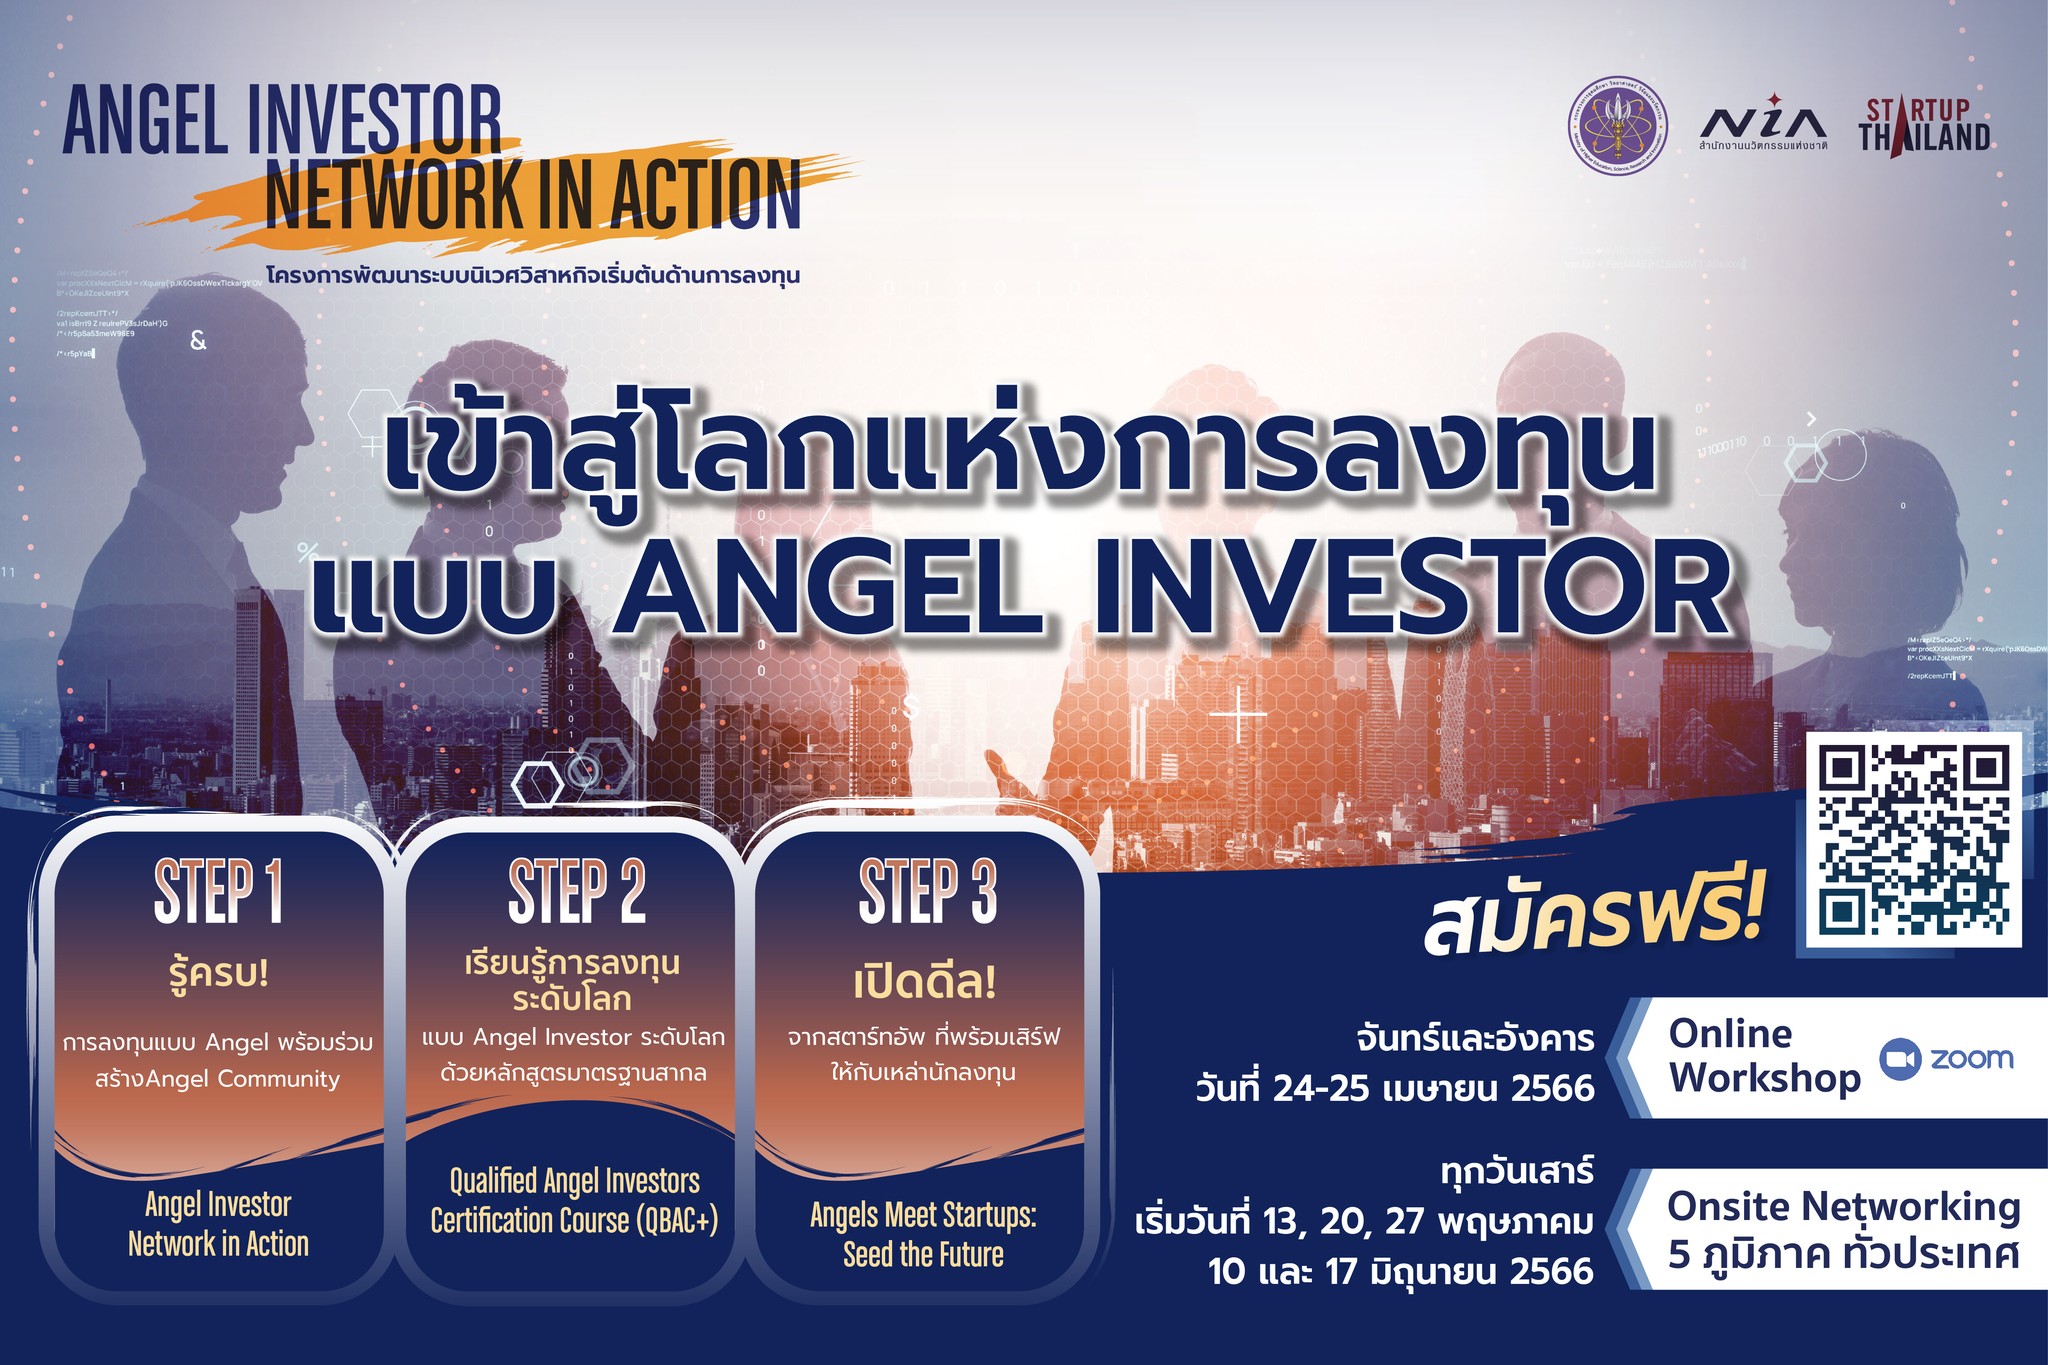 ANGEL INVESTOR NETWORK IN ACTION